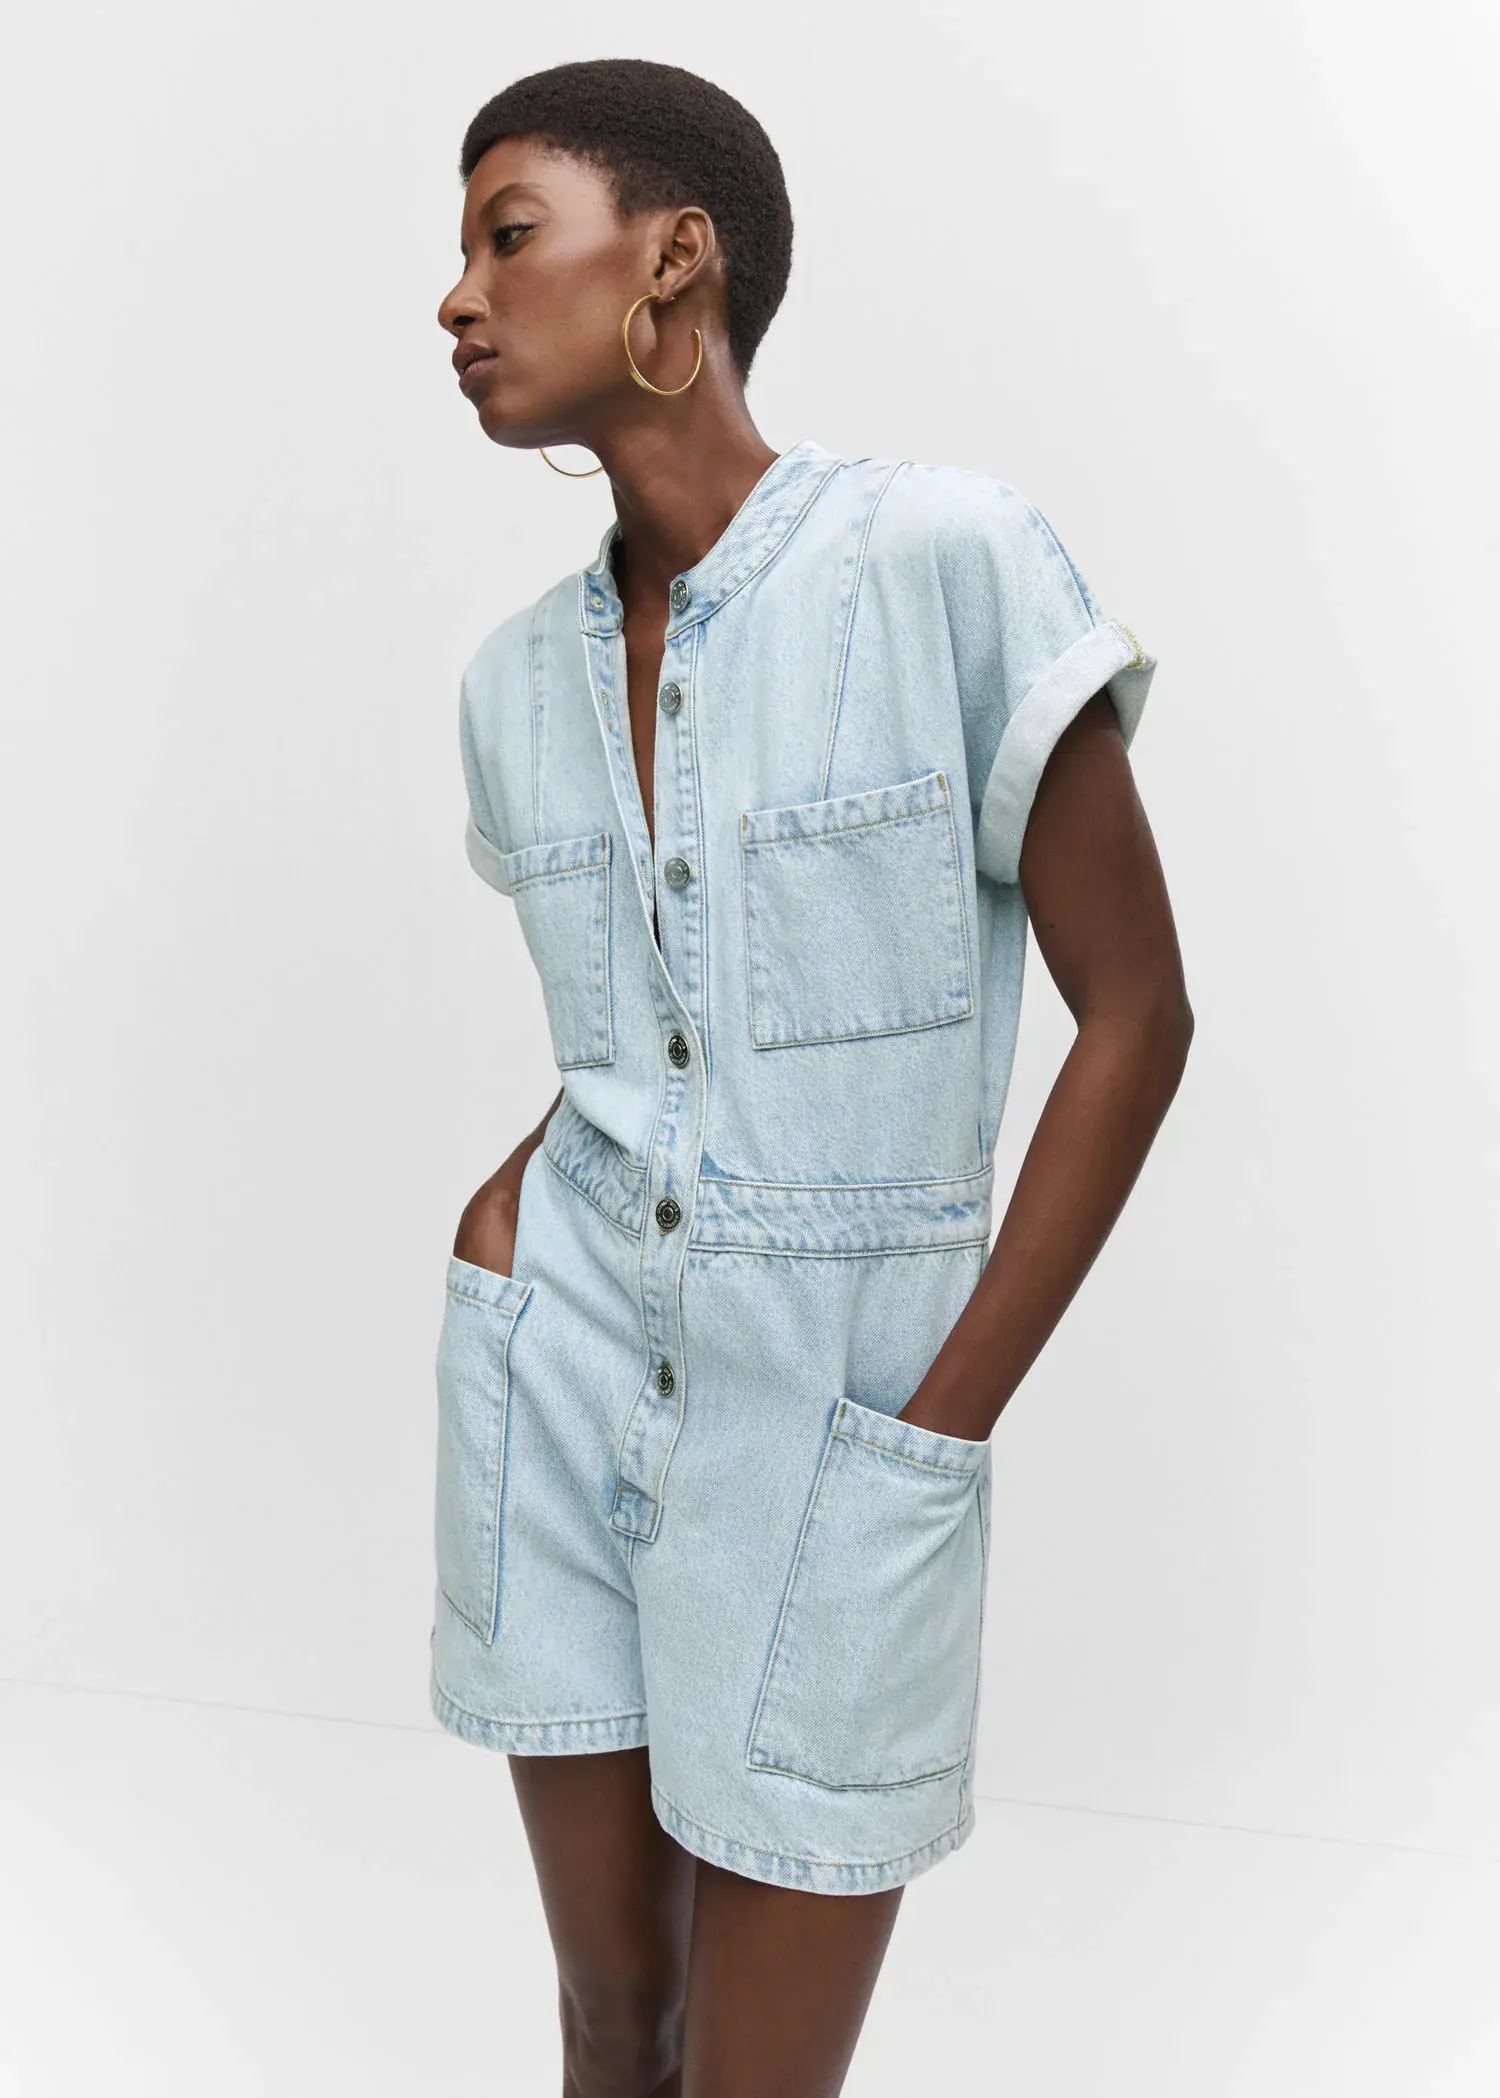 Mango Denim jumpsuit with pockets. a person wearing a light blue denim outfit. 